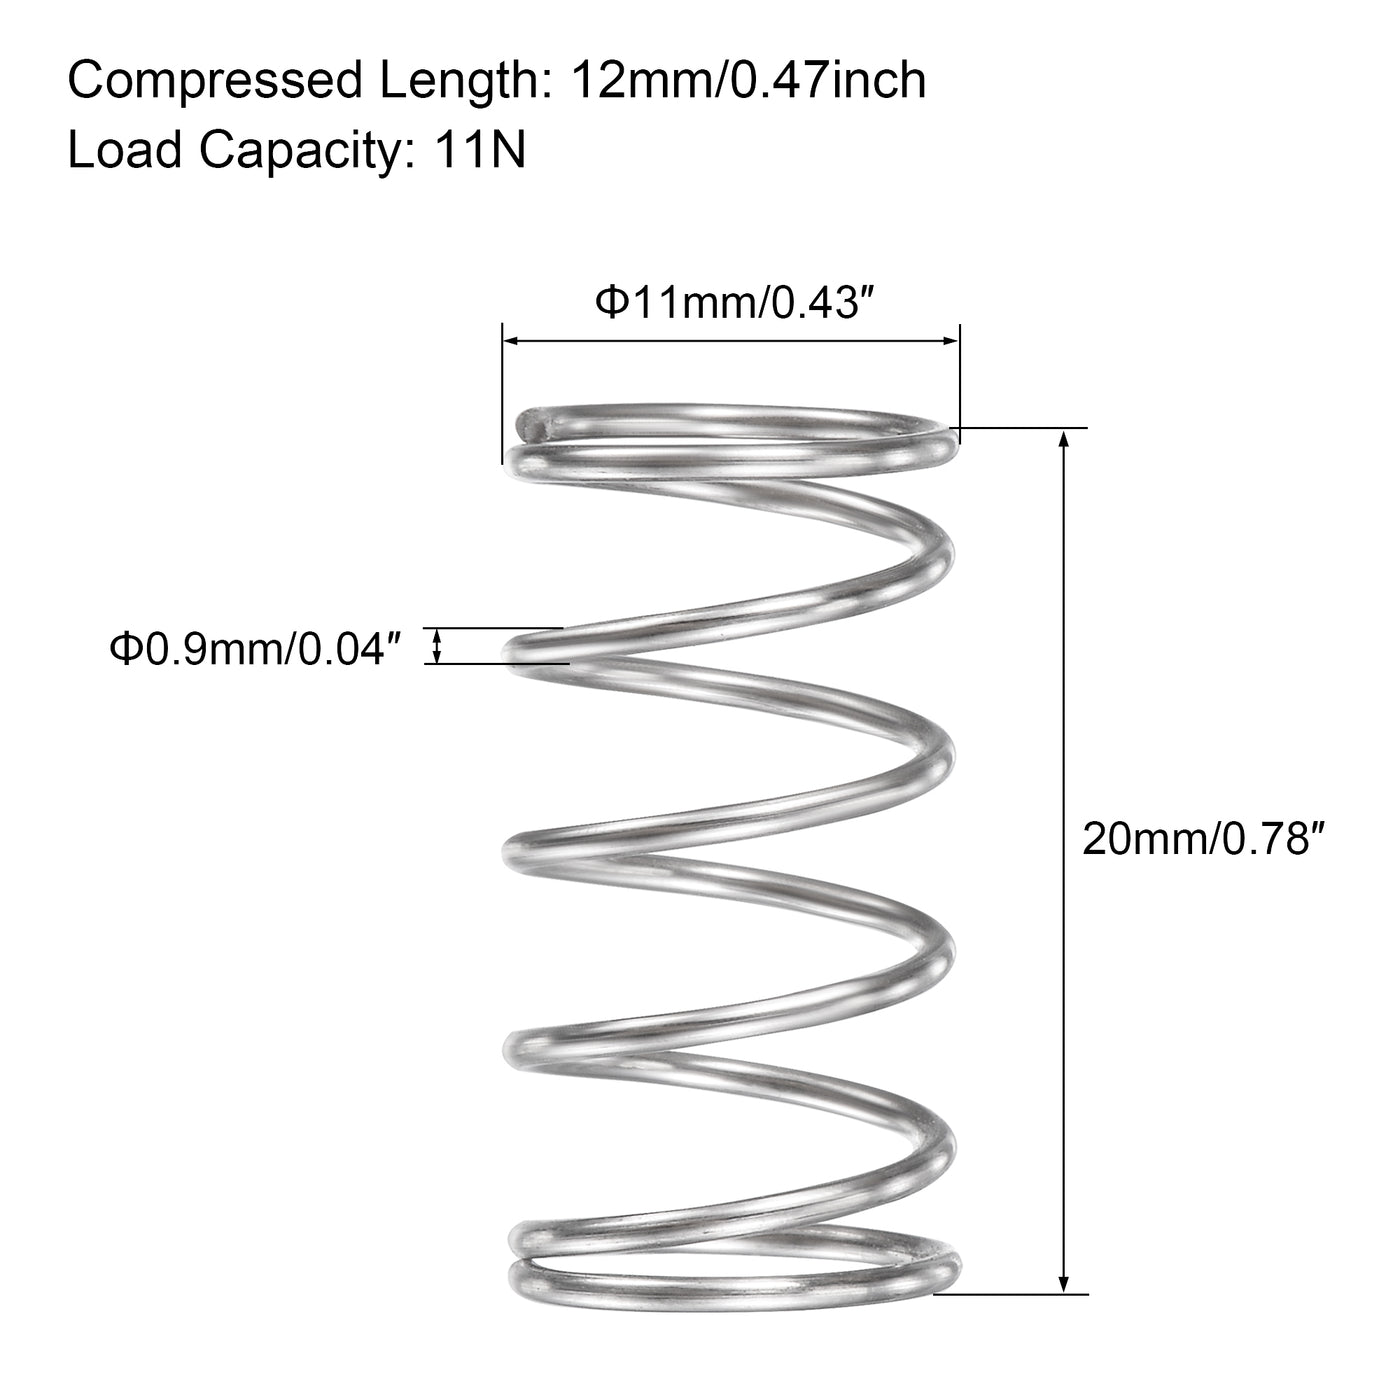 uxcell Uxcell 11mmx0.9mmx20mm 304 Stainless Steel Compression Spring 11N Load Capacity 20pcs